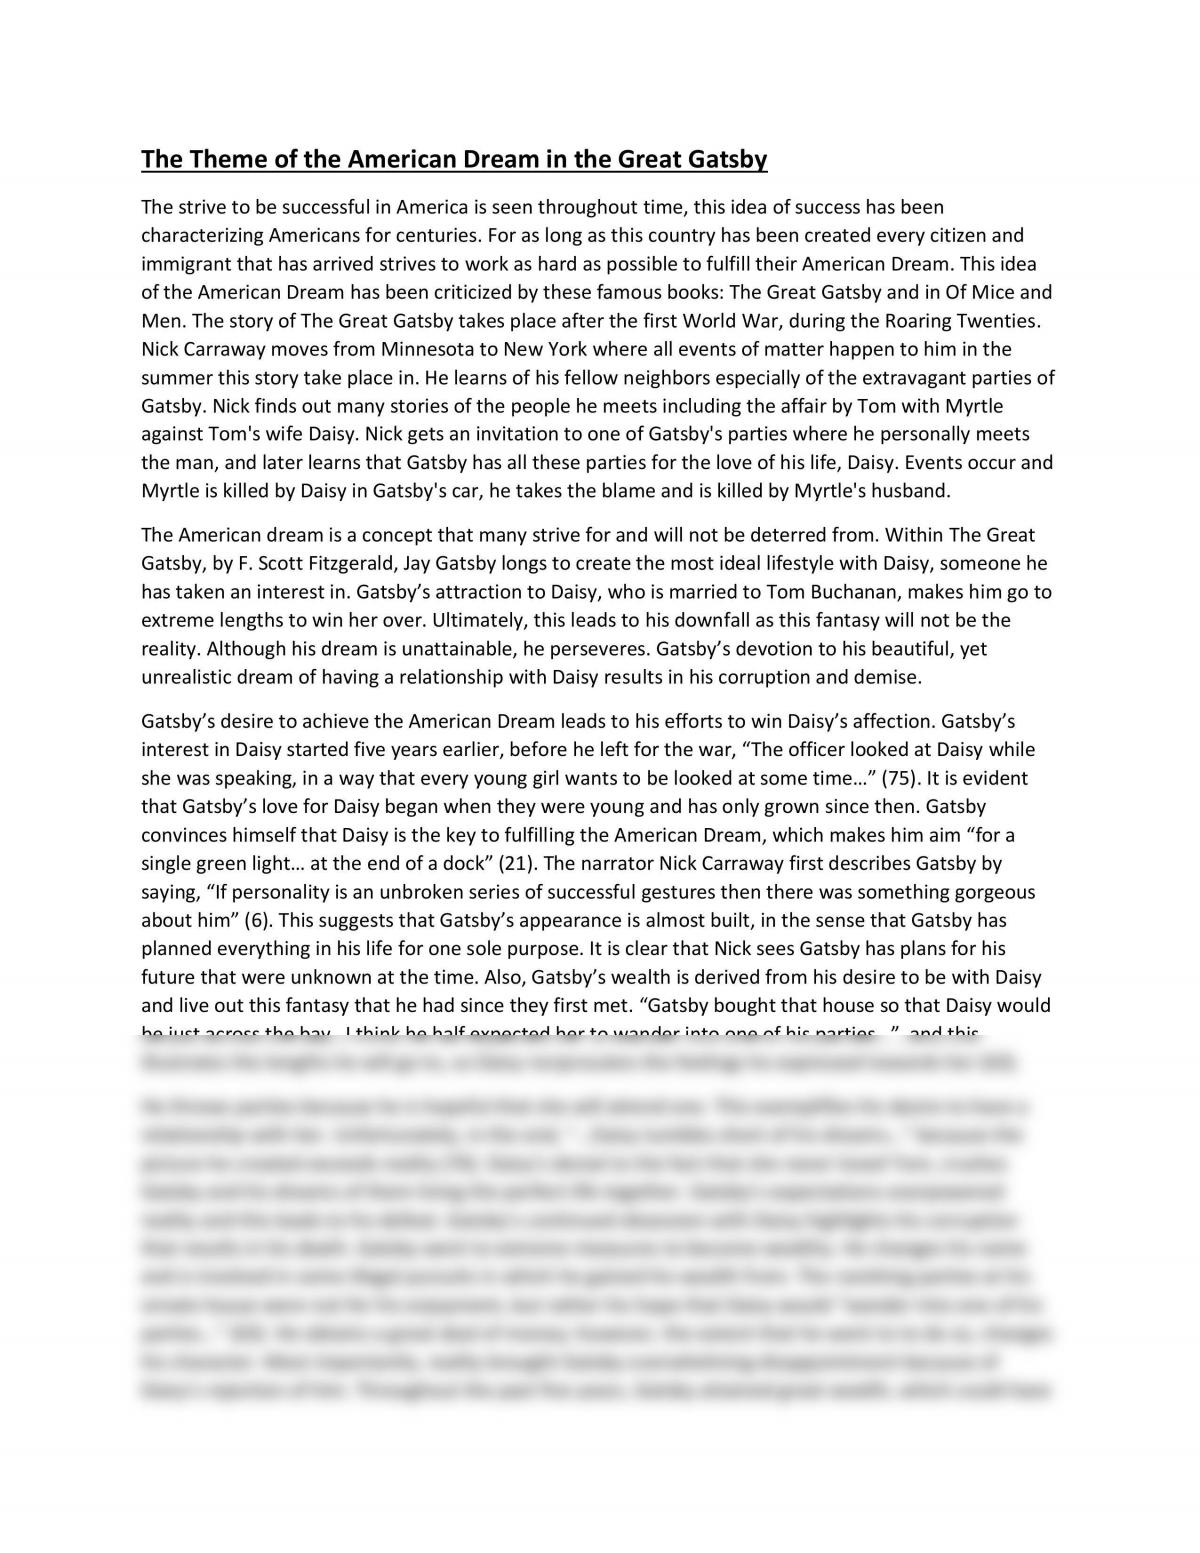 the american dream the great gatsby essay